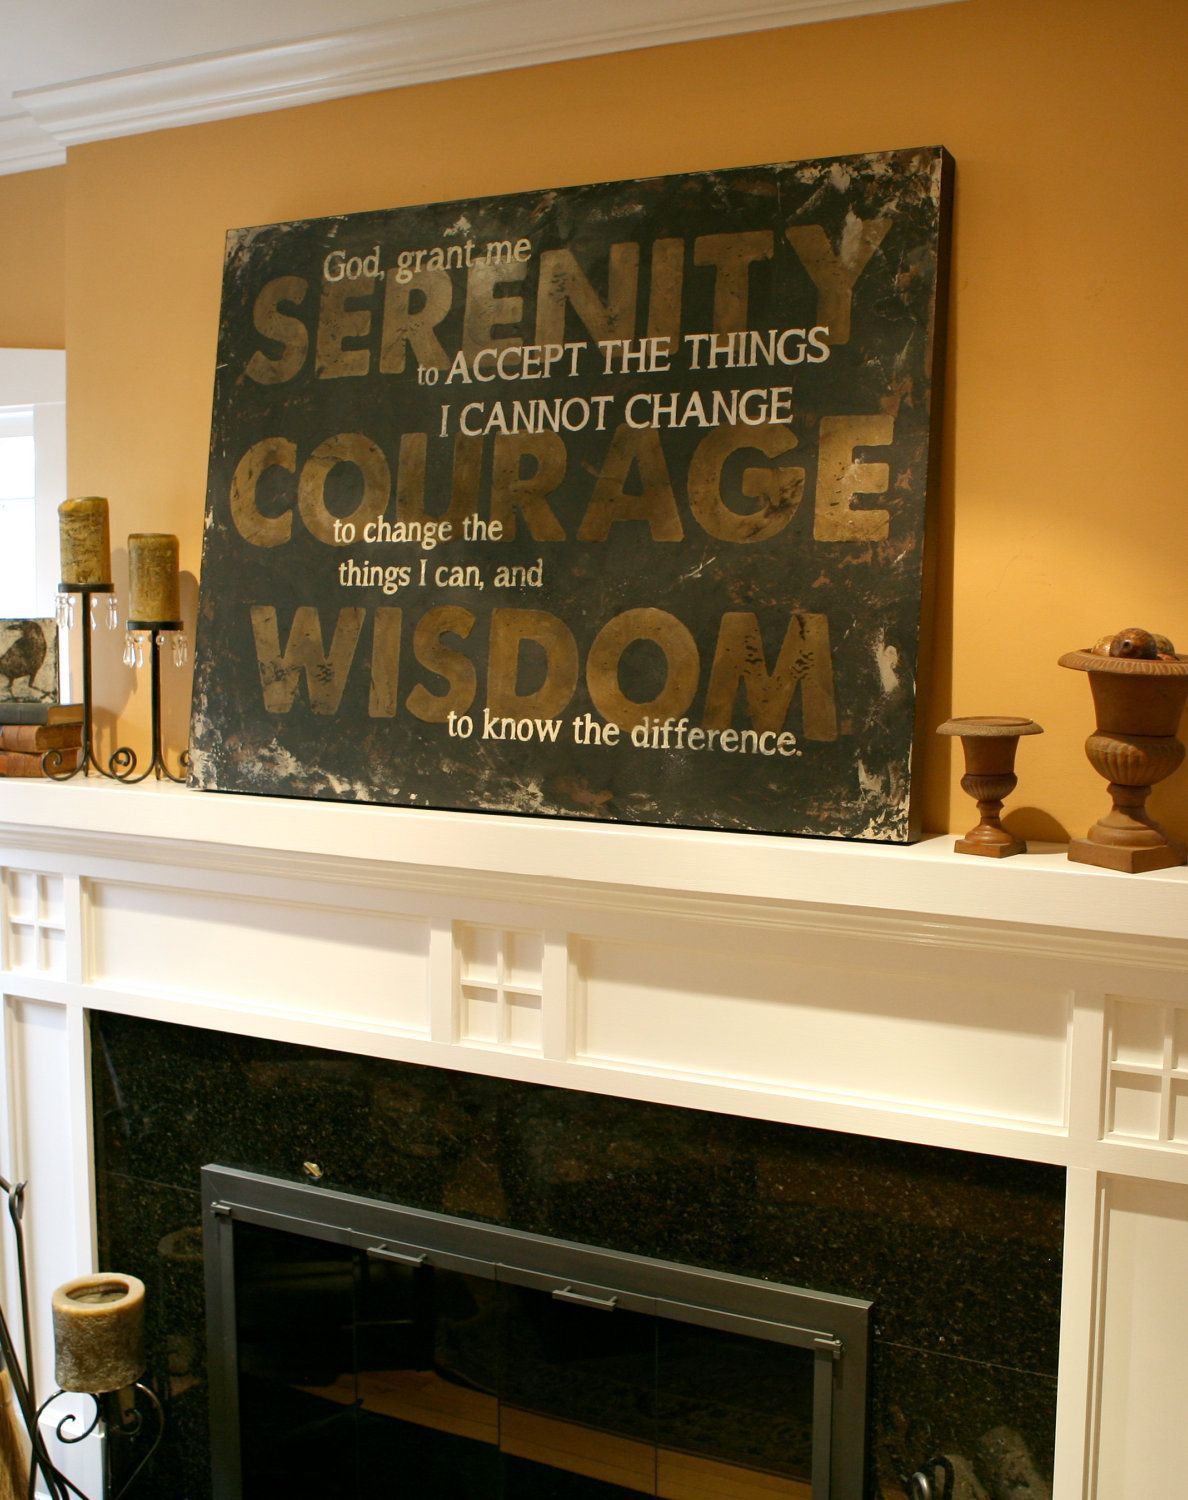 Full Serenity Prayer Wall Decal Firefighter Sticker Design Pertaining To Current A Fireman Prayer Wall Hangings (Gallery 19 of 20)